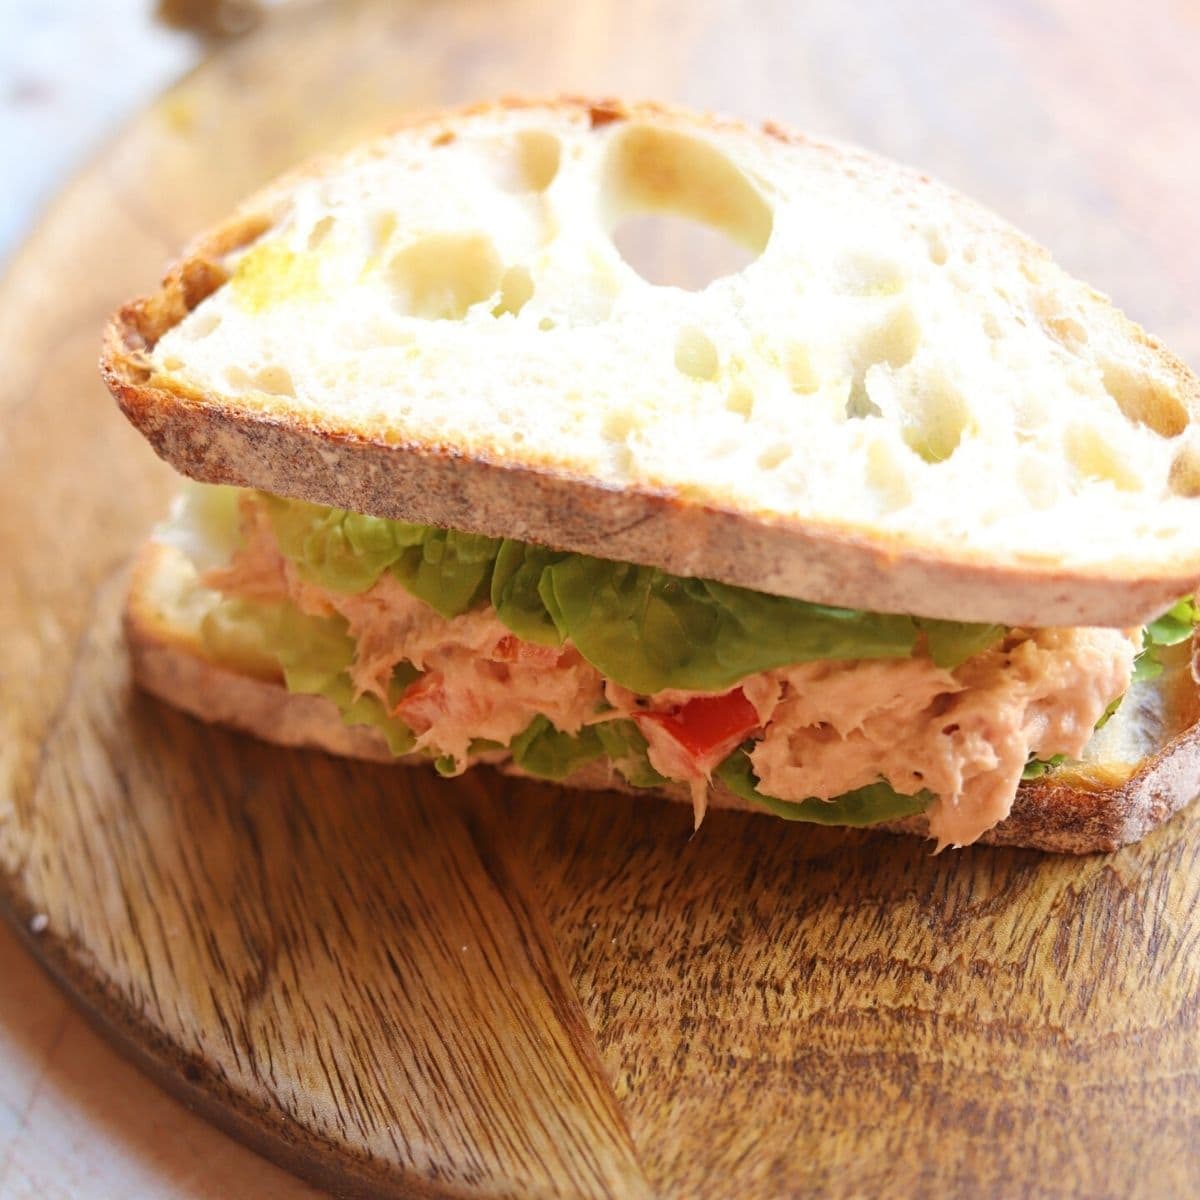 Full sandwich with tuna mix and lettuce.